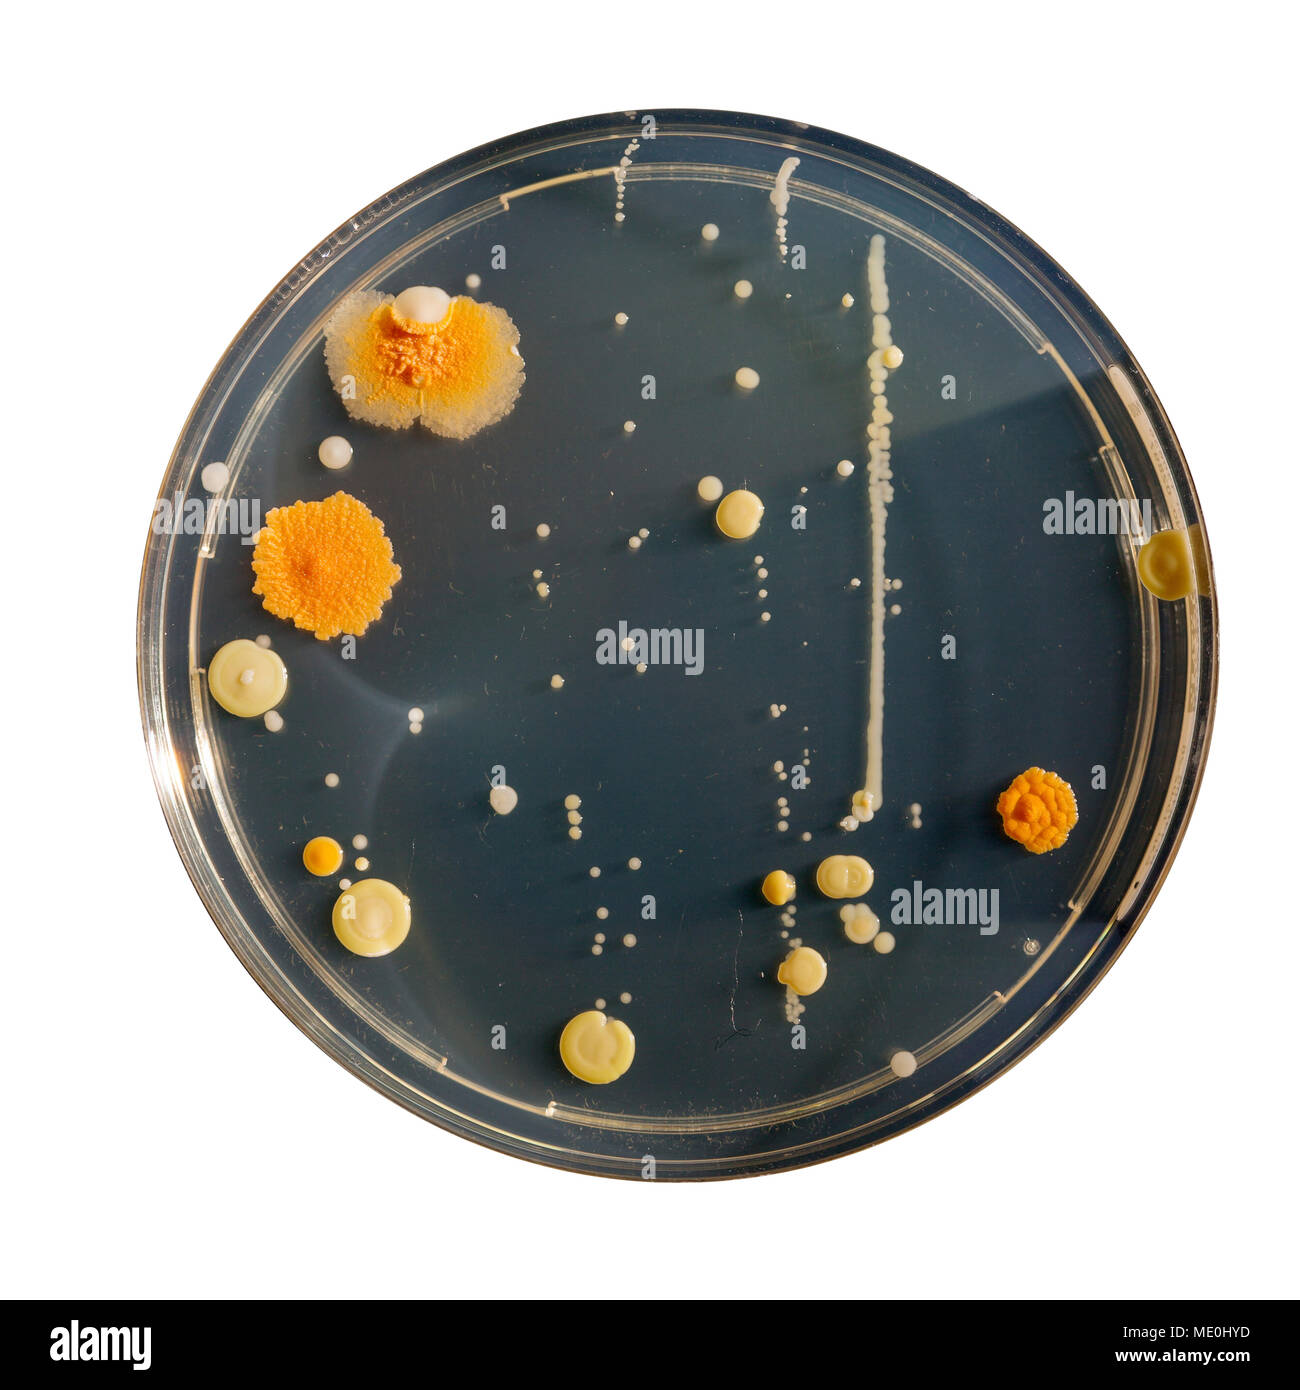 Cultures growing on Petri dish. Stock Photo